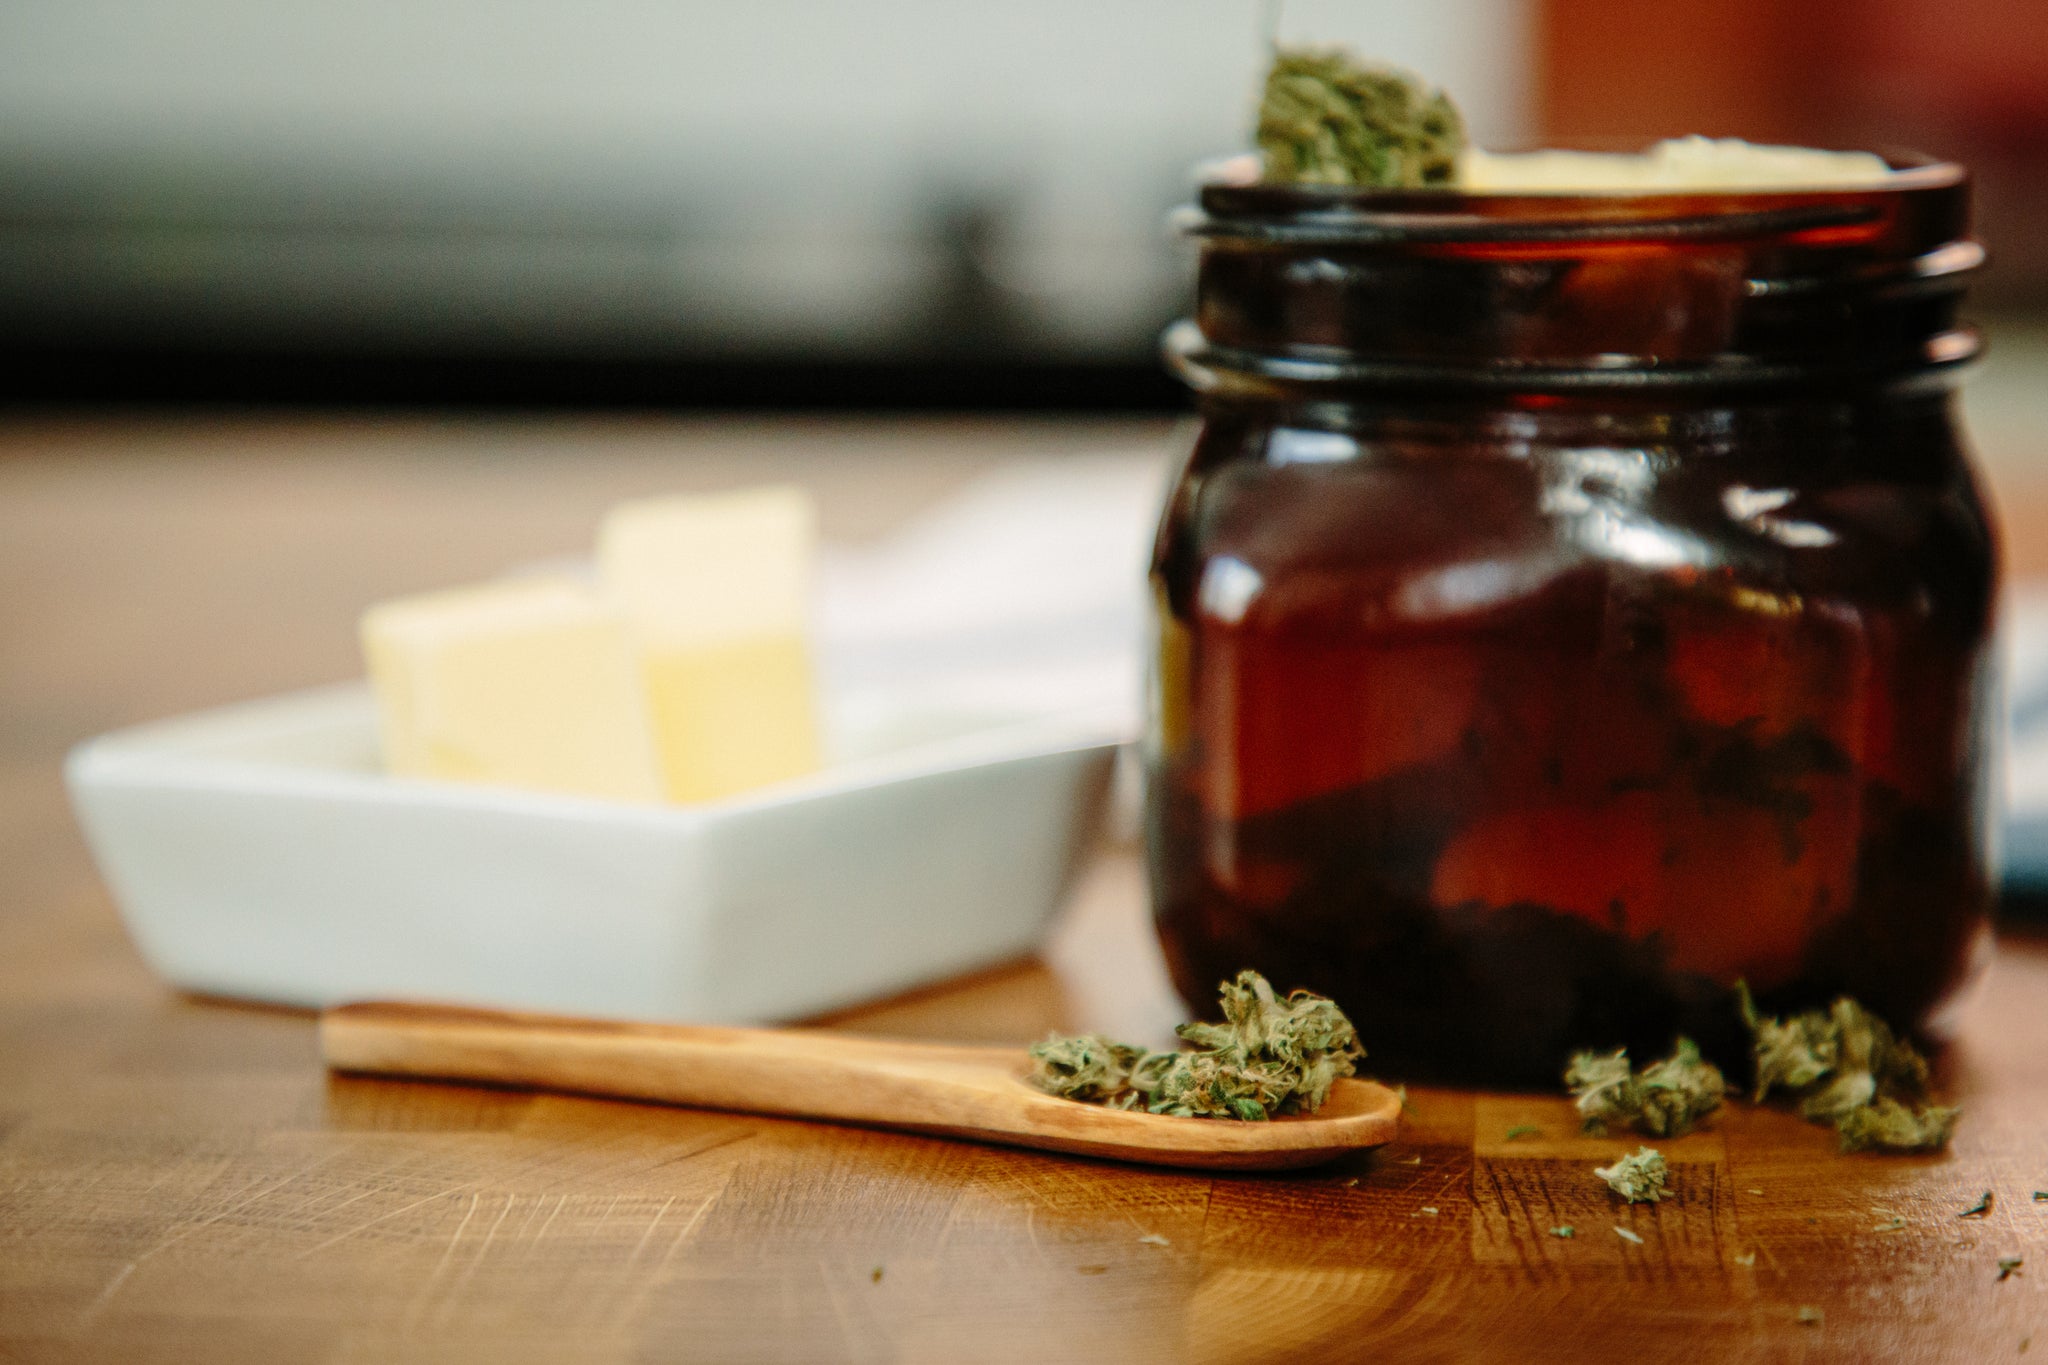 How to make POTENT Cannabis Butter